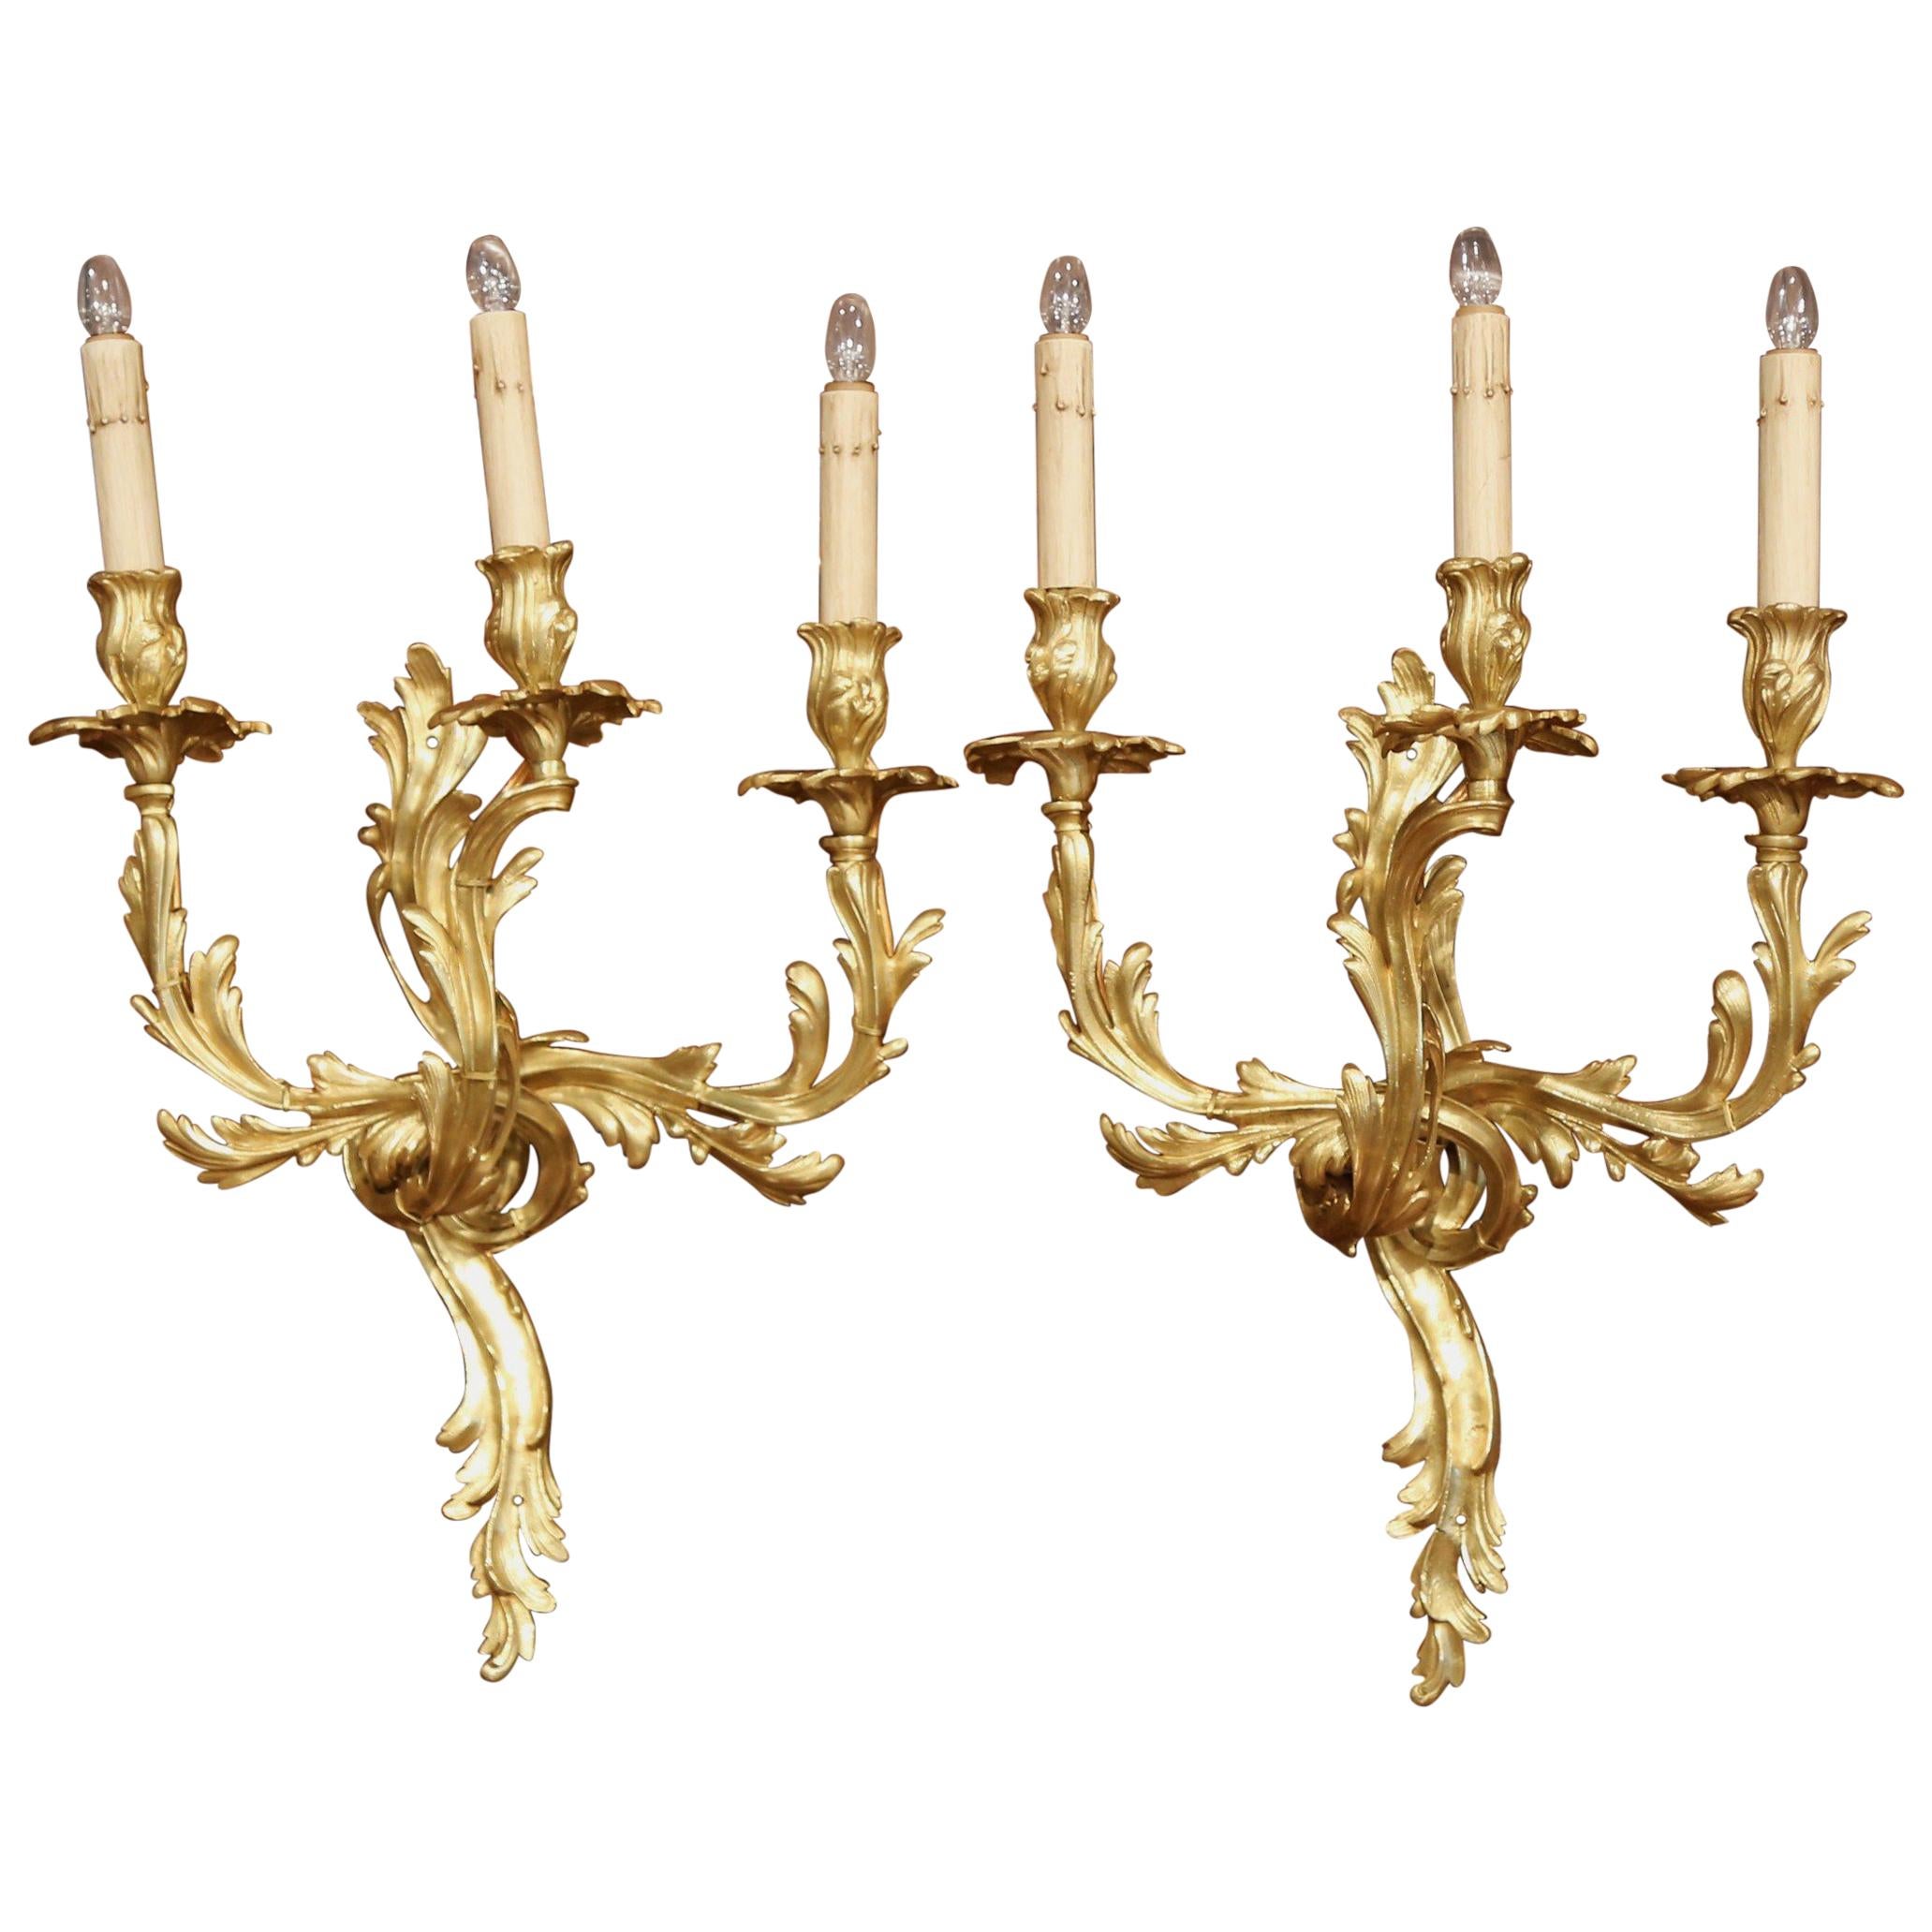 Pair of Early 20th Century French Louis XV Three-Light Gilt Bronze Wall Sconces